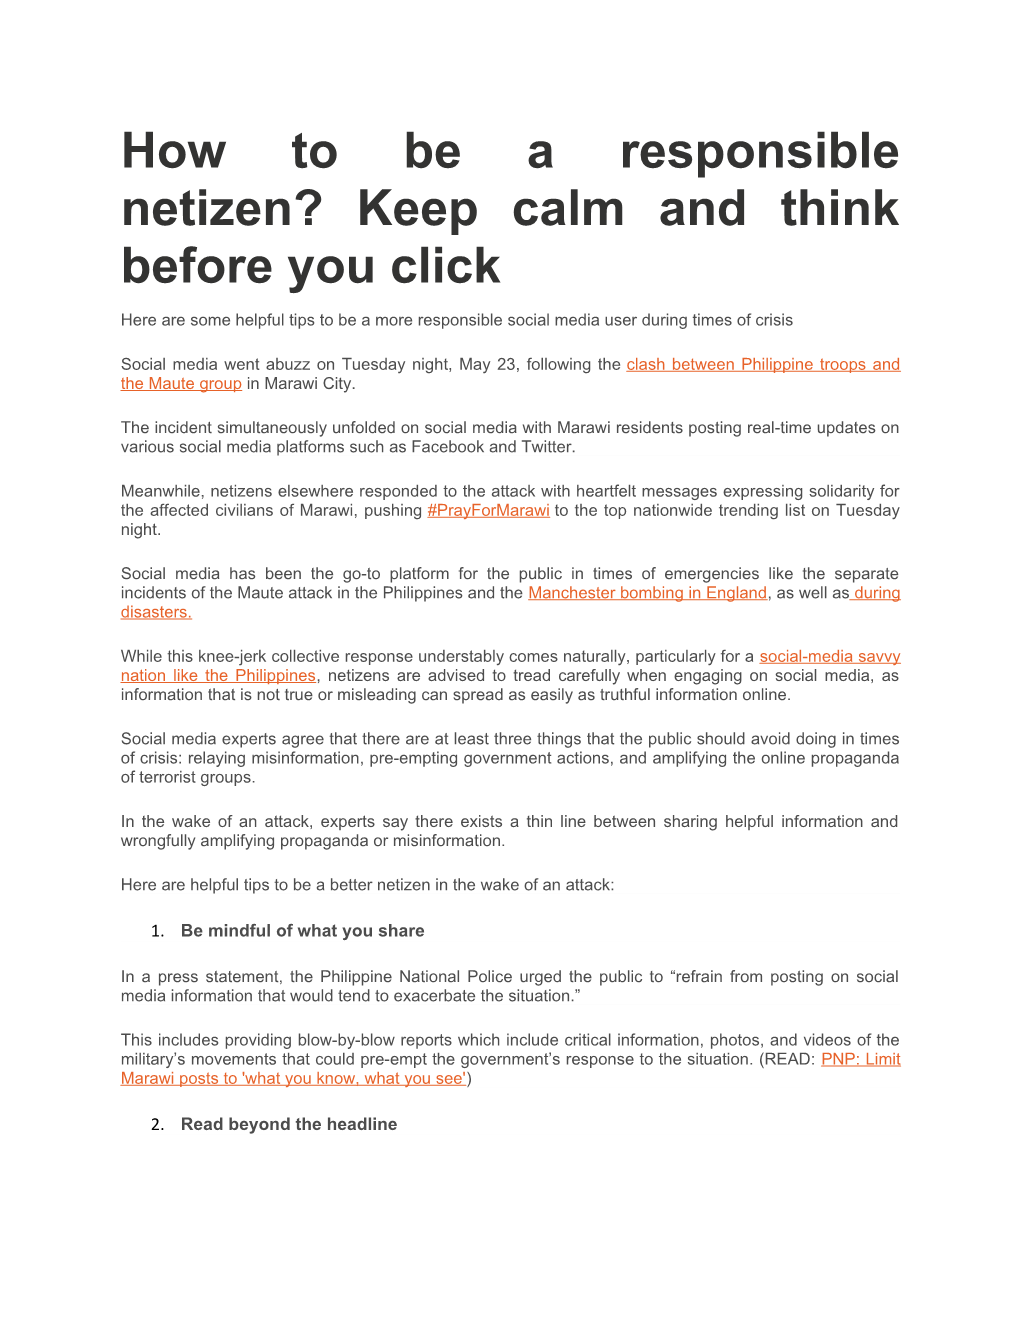 How to Be a Responsible Netizen? Keep Calm and Think Before You Click